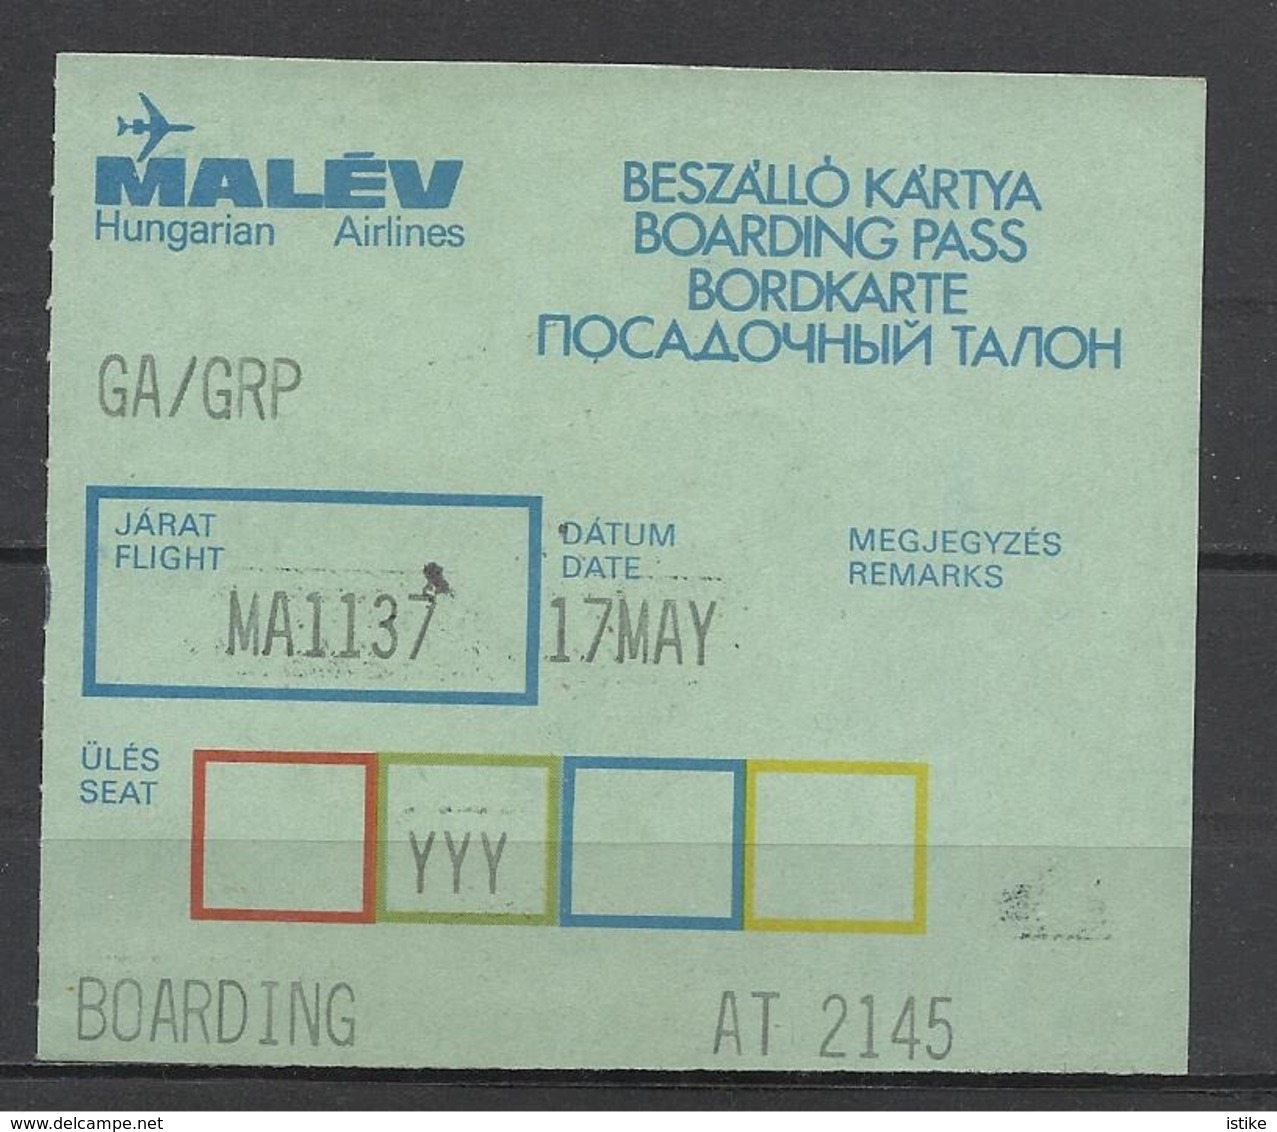 Hungarian Airlines, Malév, Boarding Pass, '70s. - Europe